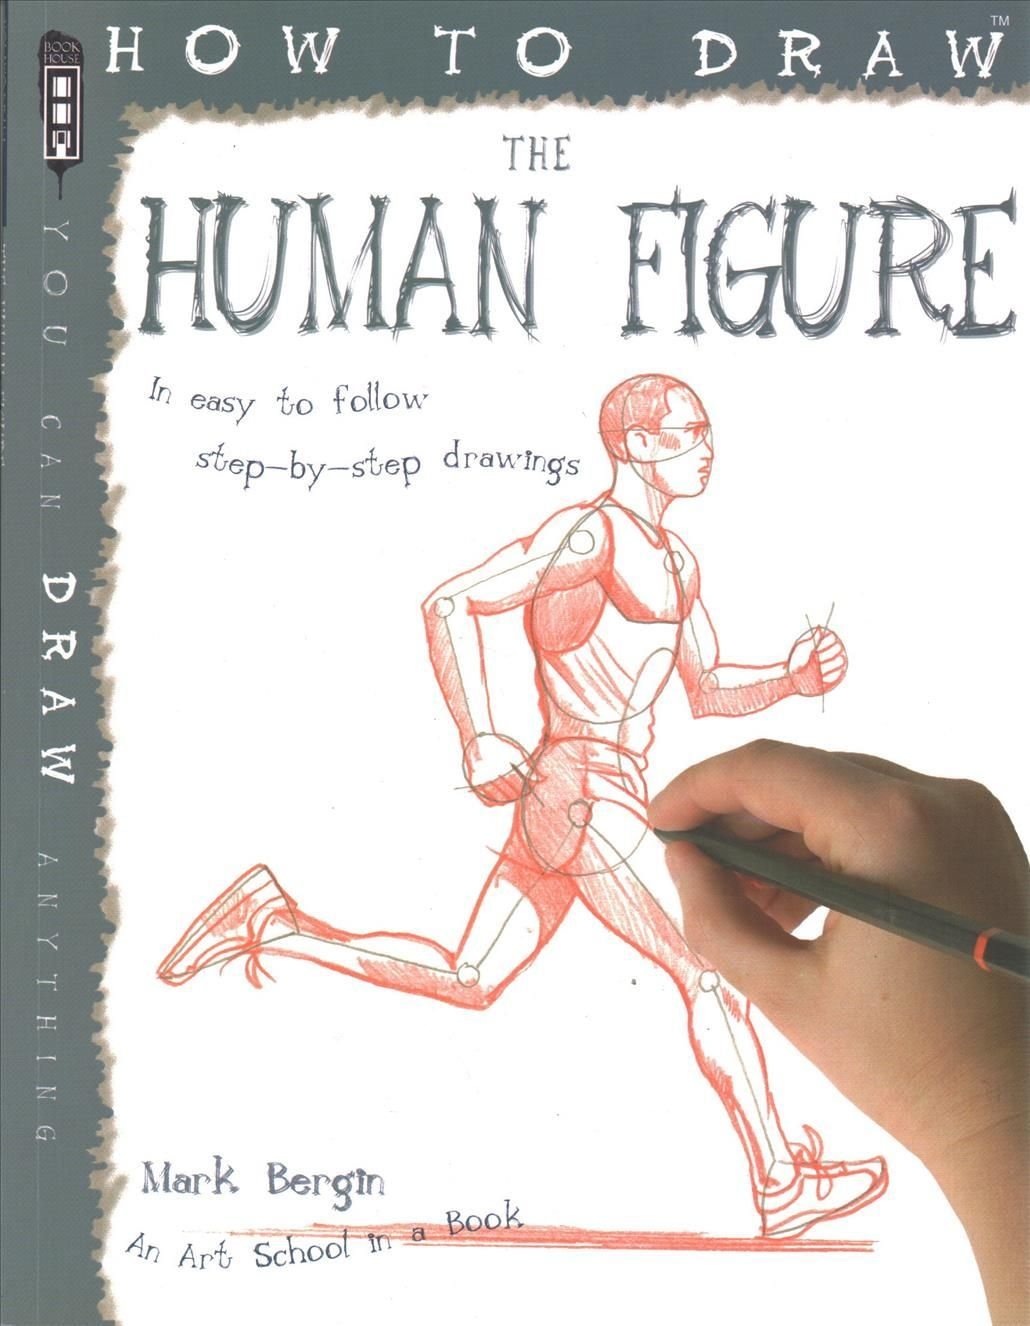 Easy Sketching, Human Figure Drawing Techniques, Korean Body Drawing Guide  | eBay